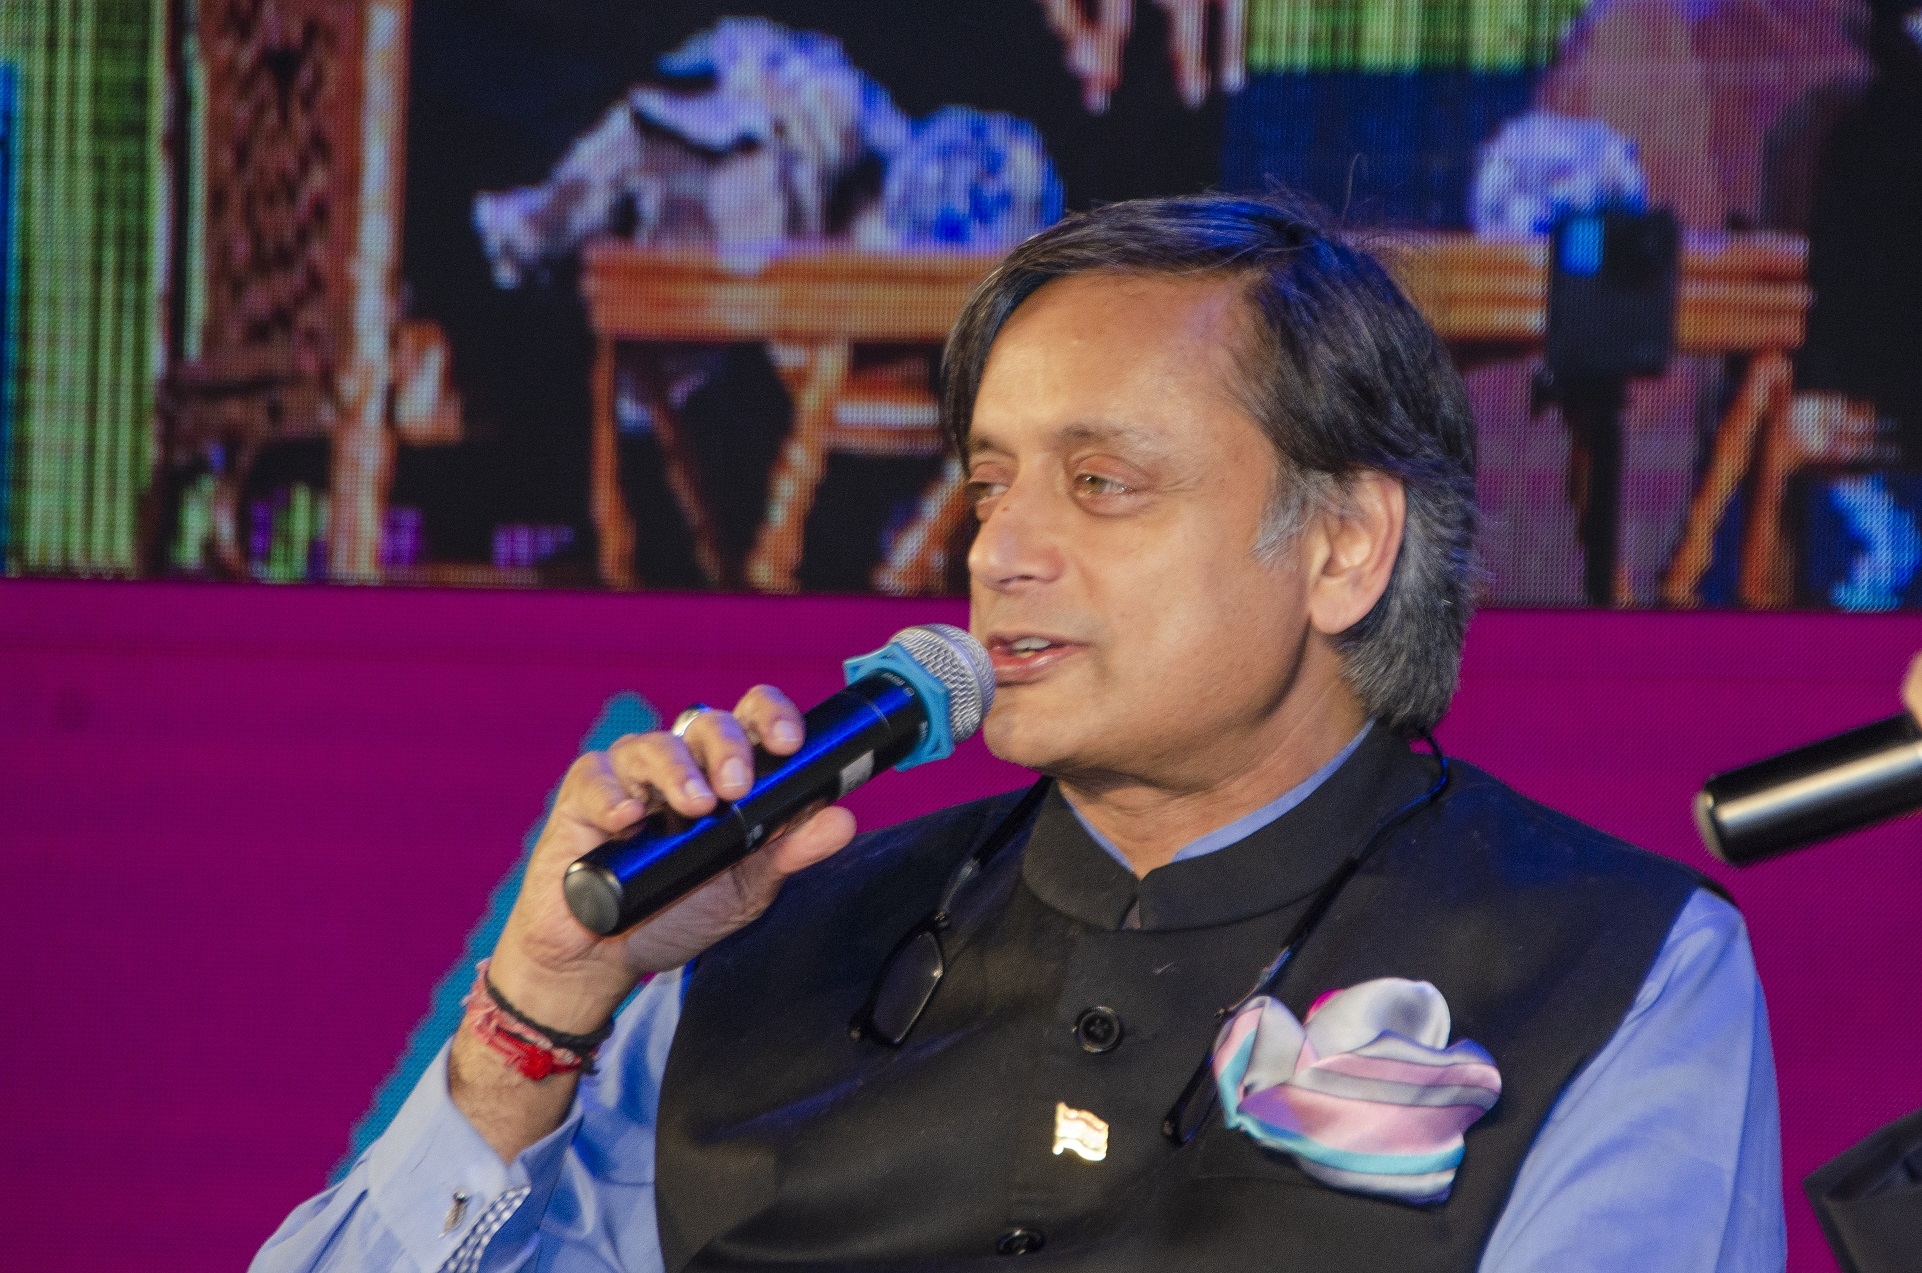 Till the minorities continue to suffer, country will not succeed: Shashi Tharoor